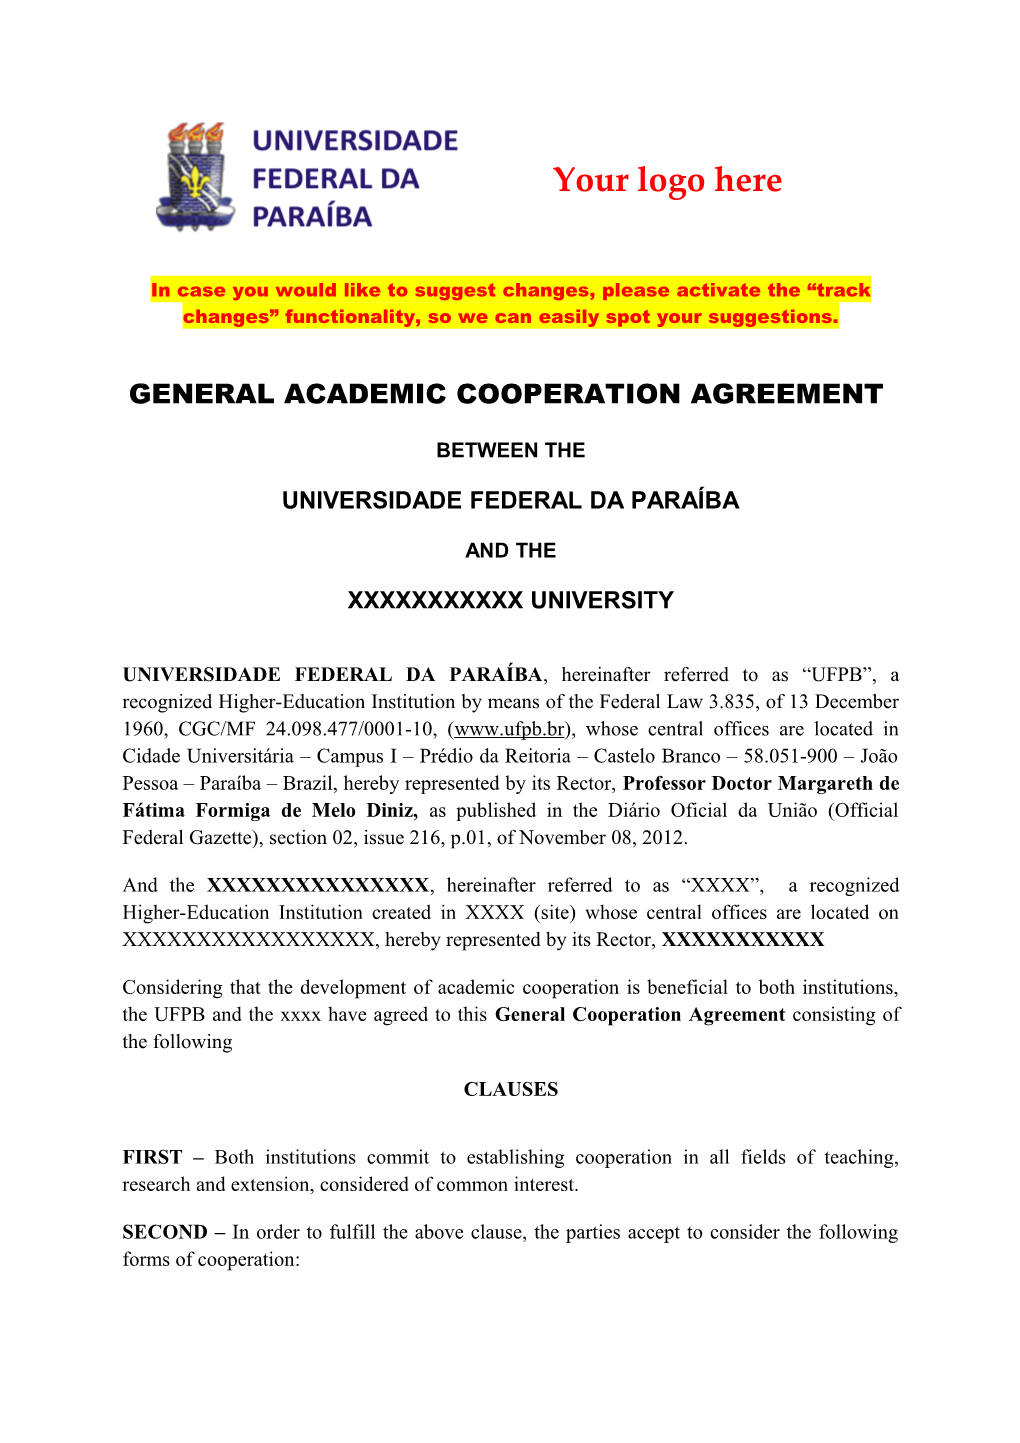 General Academic Cooperation Agreement